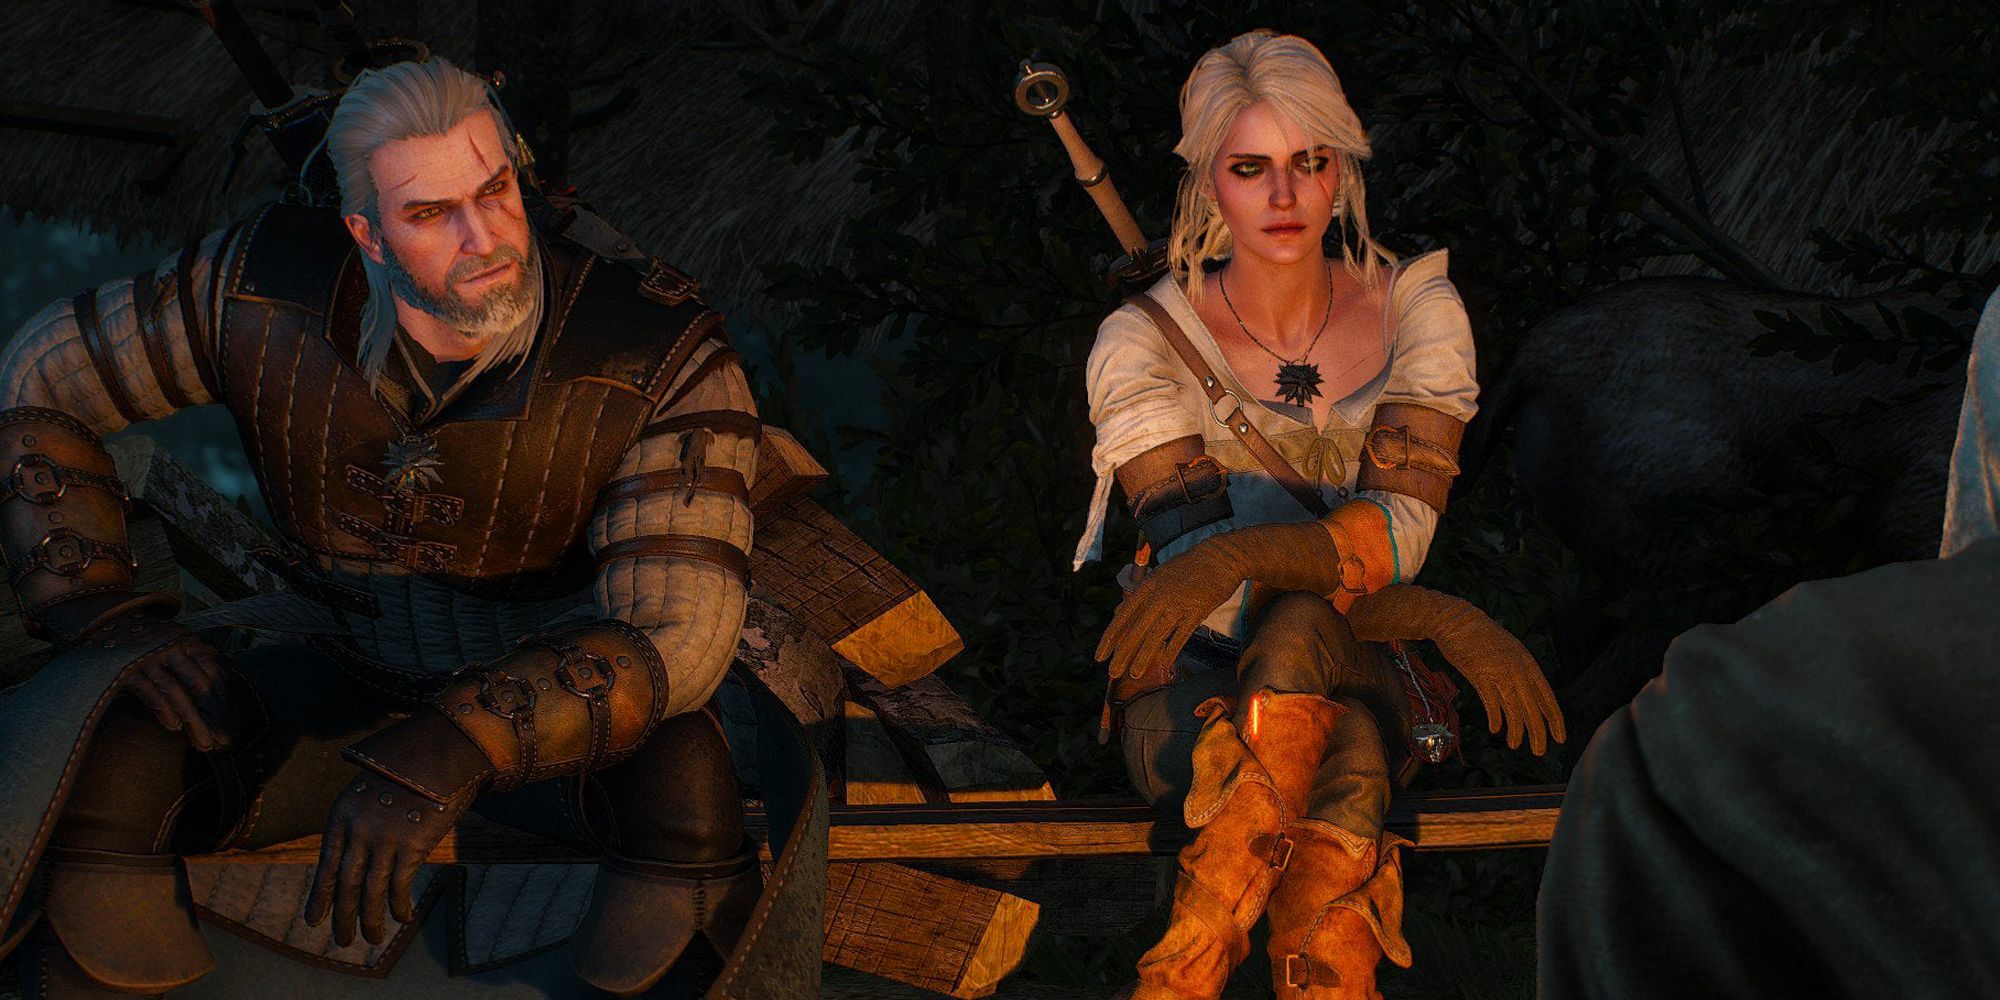 The Witcher 3 Geralt and Ciri sat by a campfire.